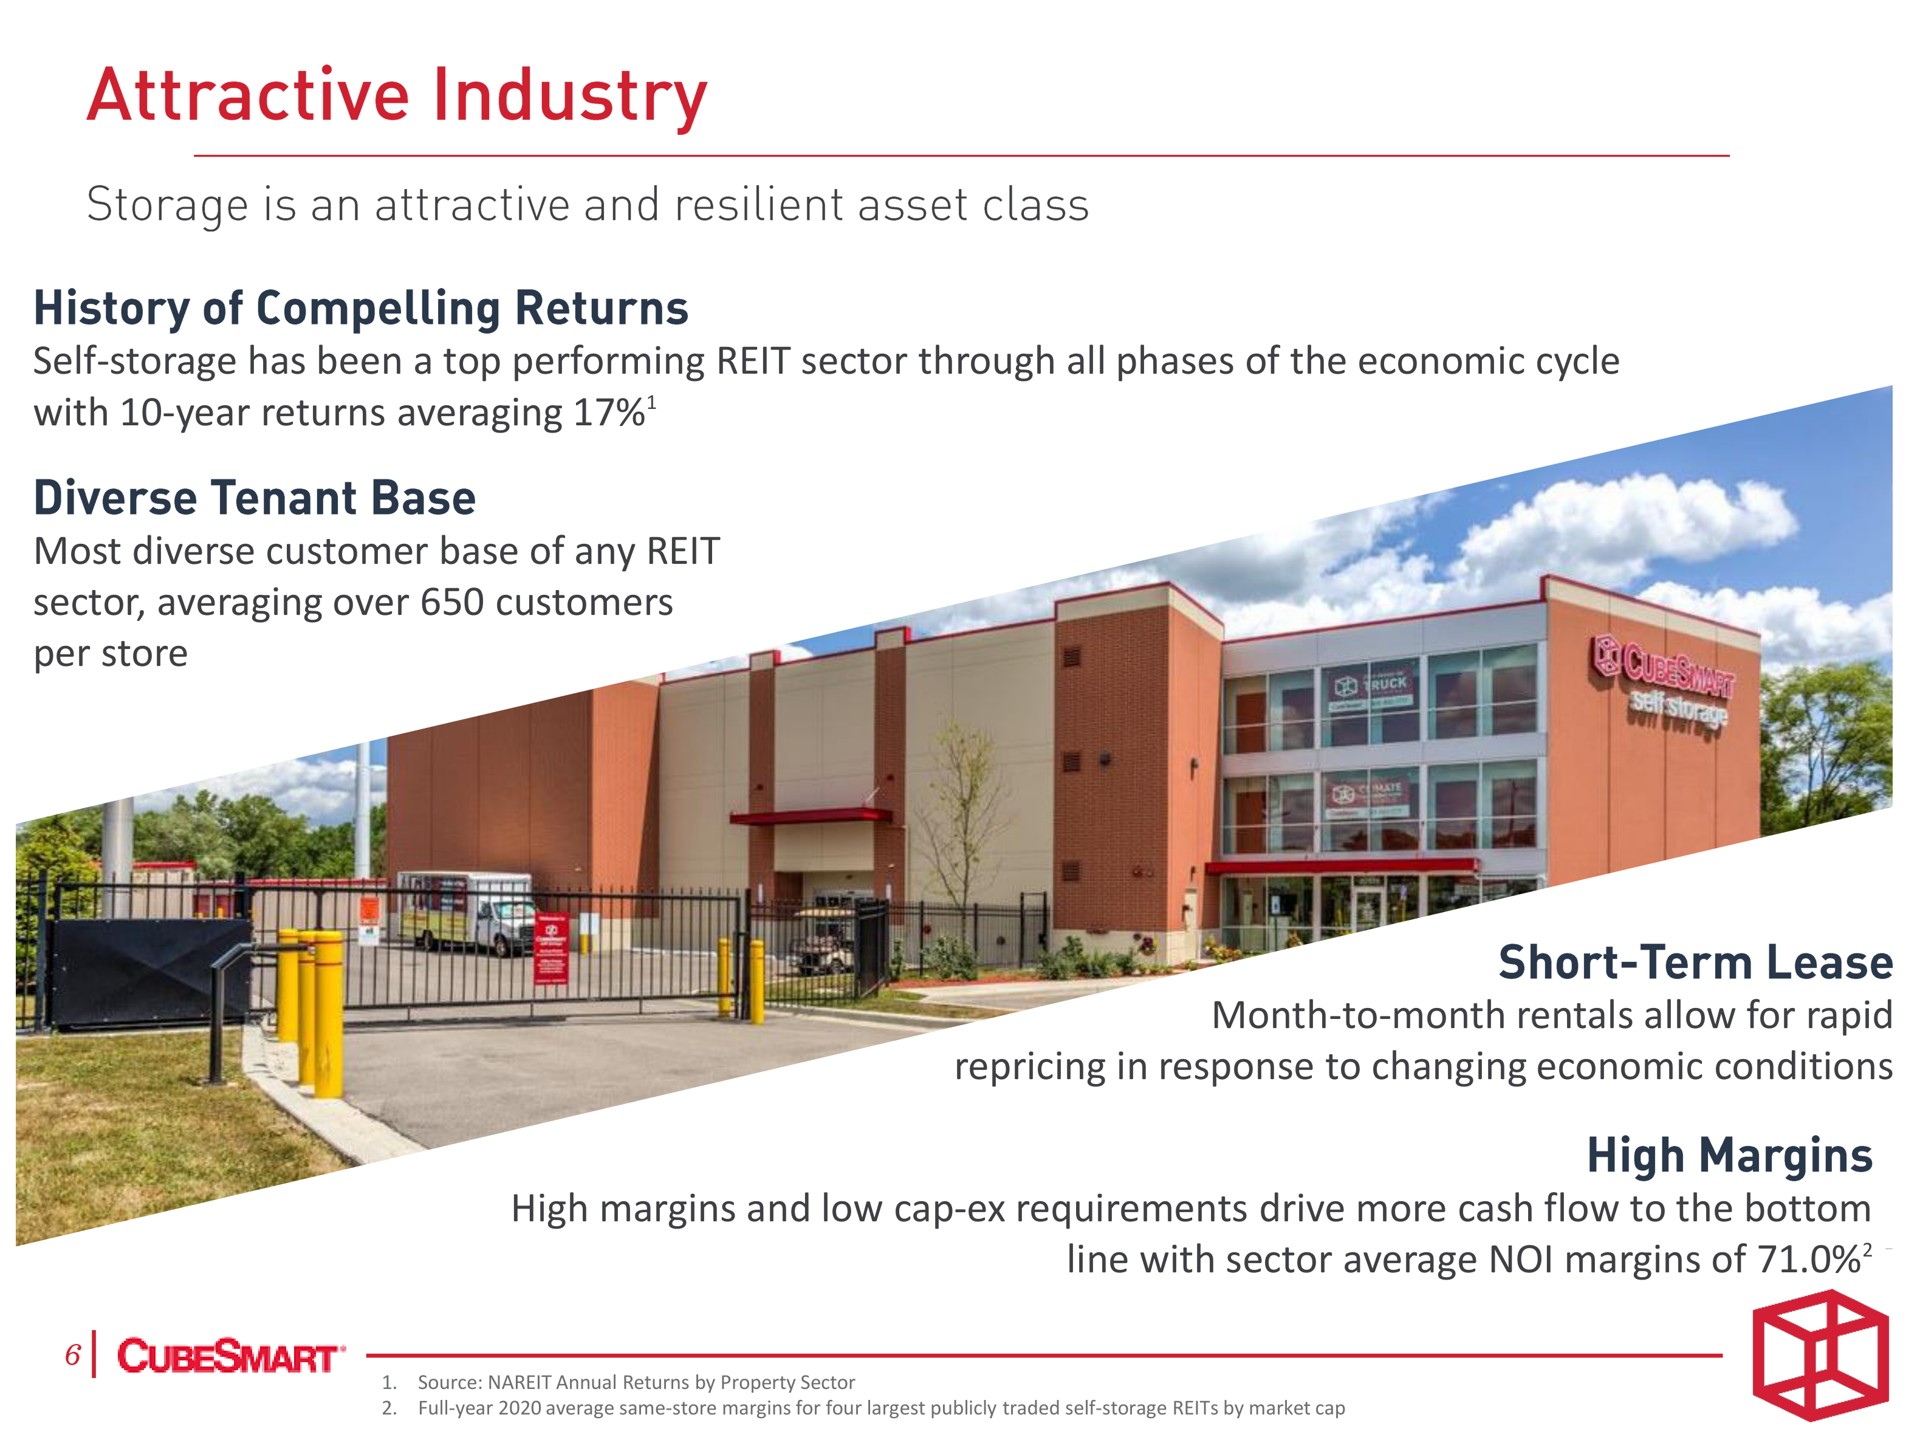 self storage has been a top performing reit sector through all phases of the economic cycle with year returns averaging most diverse customer base of any reit sector averaging over customers per store month to month rentals allow for rapid in response to changing economic conditions high margins and low cap requirements drive more cash flow to the bottom line with sector average margins of attractive industry | CubeSmart